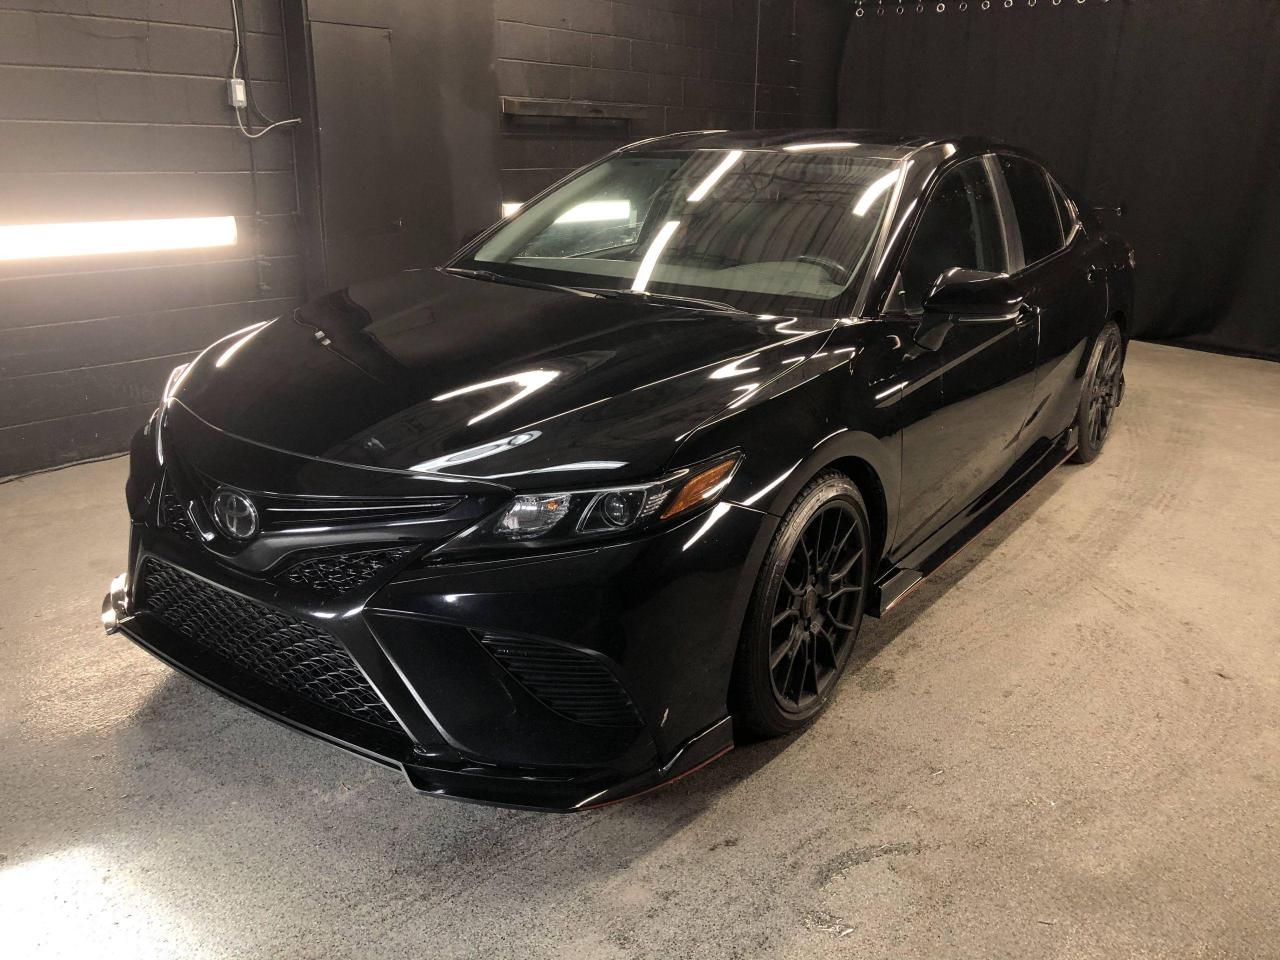 2020 Toyota Camry TRD XSE V6 / Clean CarFax / 301HP - Photo #1